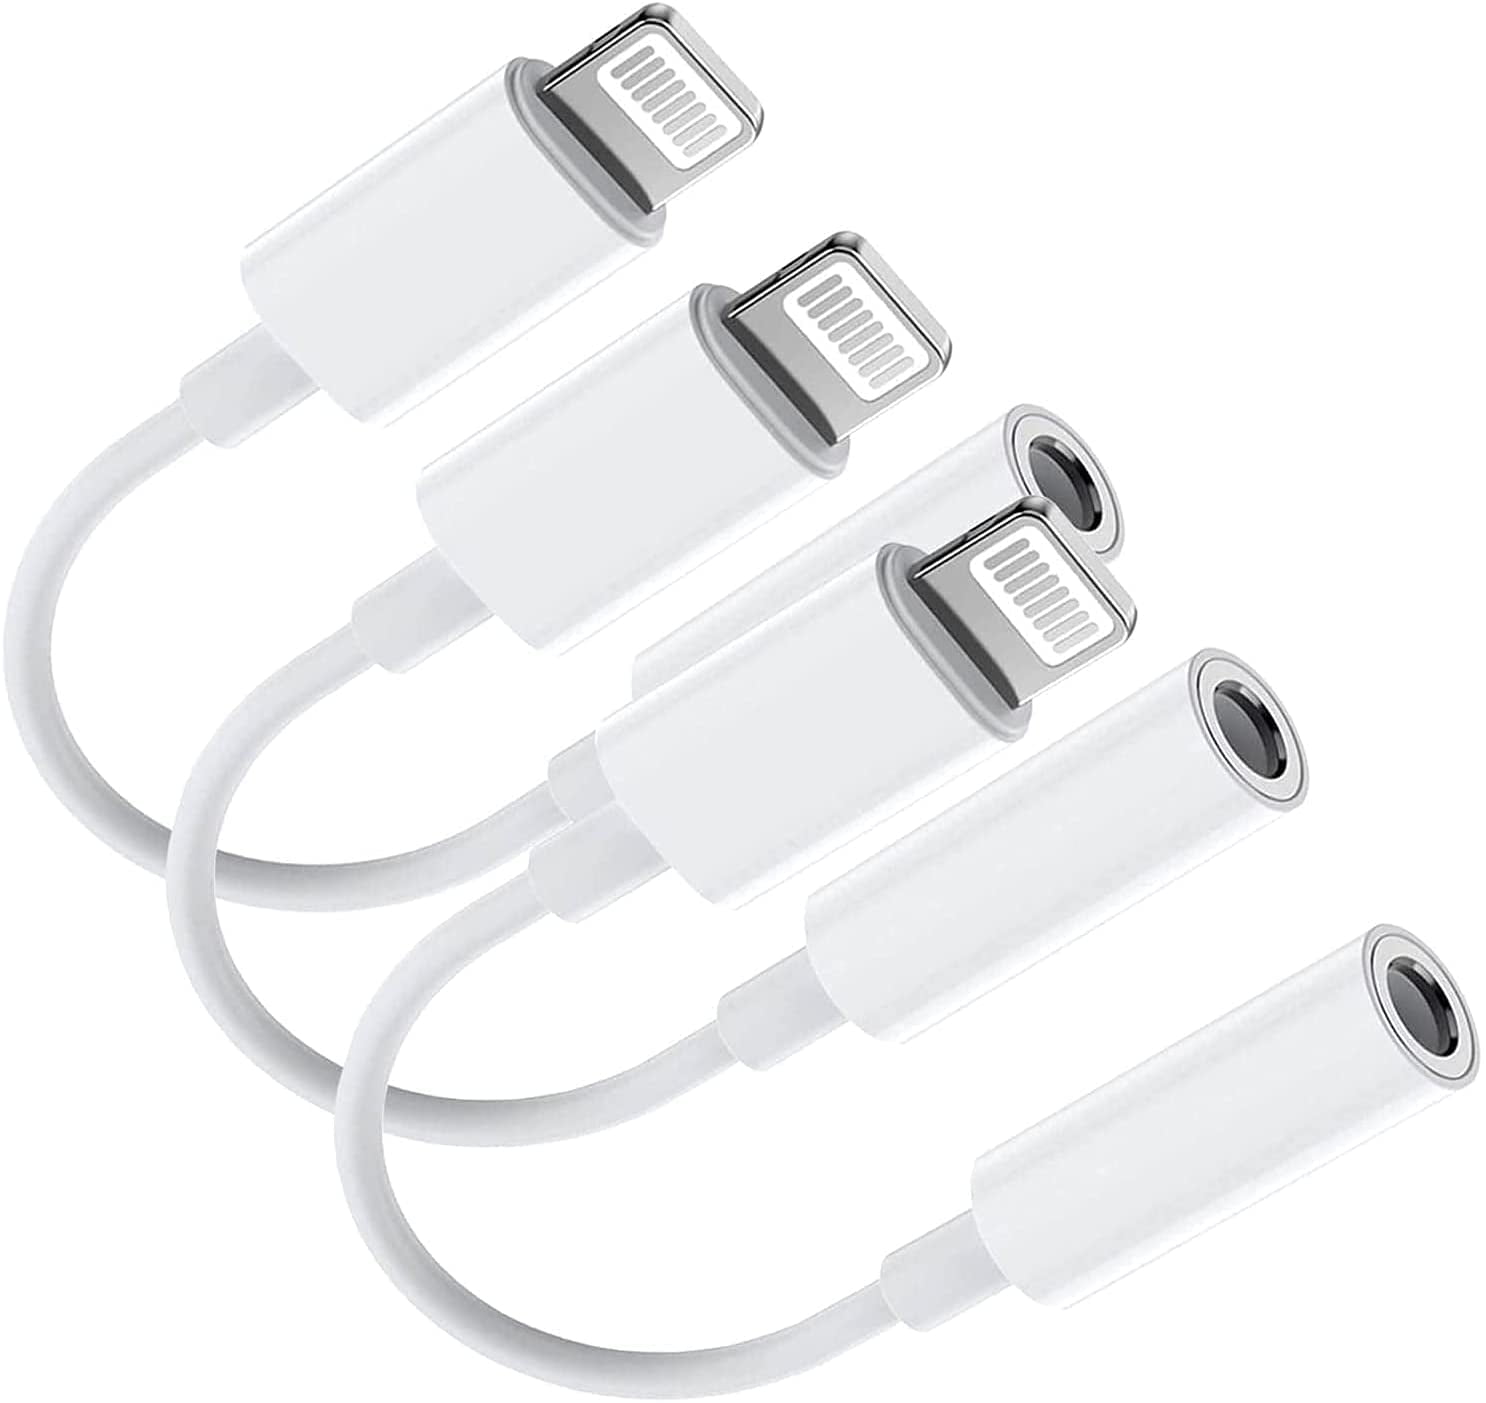 Concept] Female Lightning to 3,5mm Jack Adapter for Earpods w/ Lightning-Connectors  : r/ipod